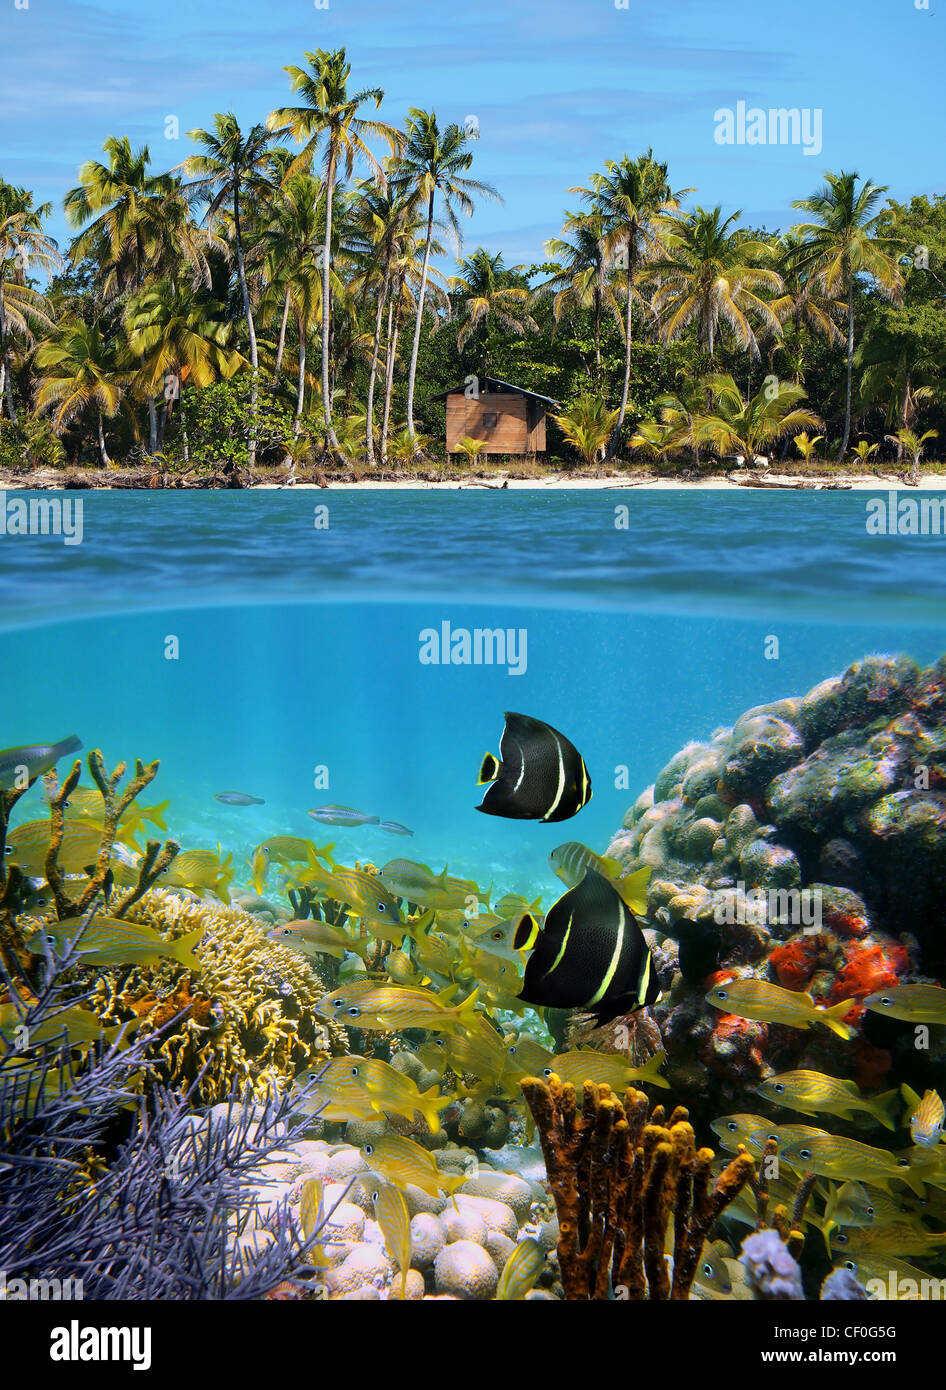 half above and below water surface, tropical coast with a hut and coconut trees, underwater a colorful coral reef with fish, Caribbean sea Stock Photo